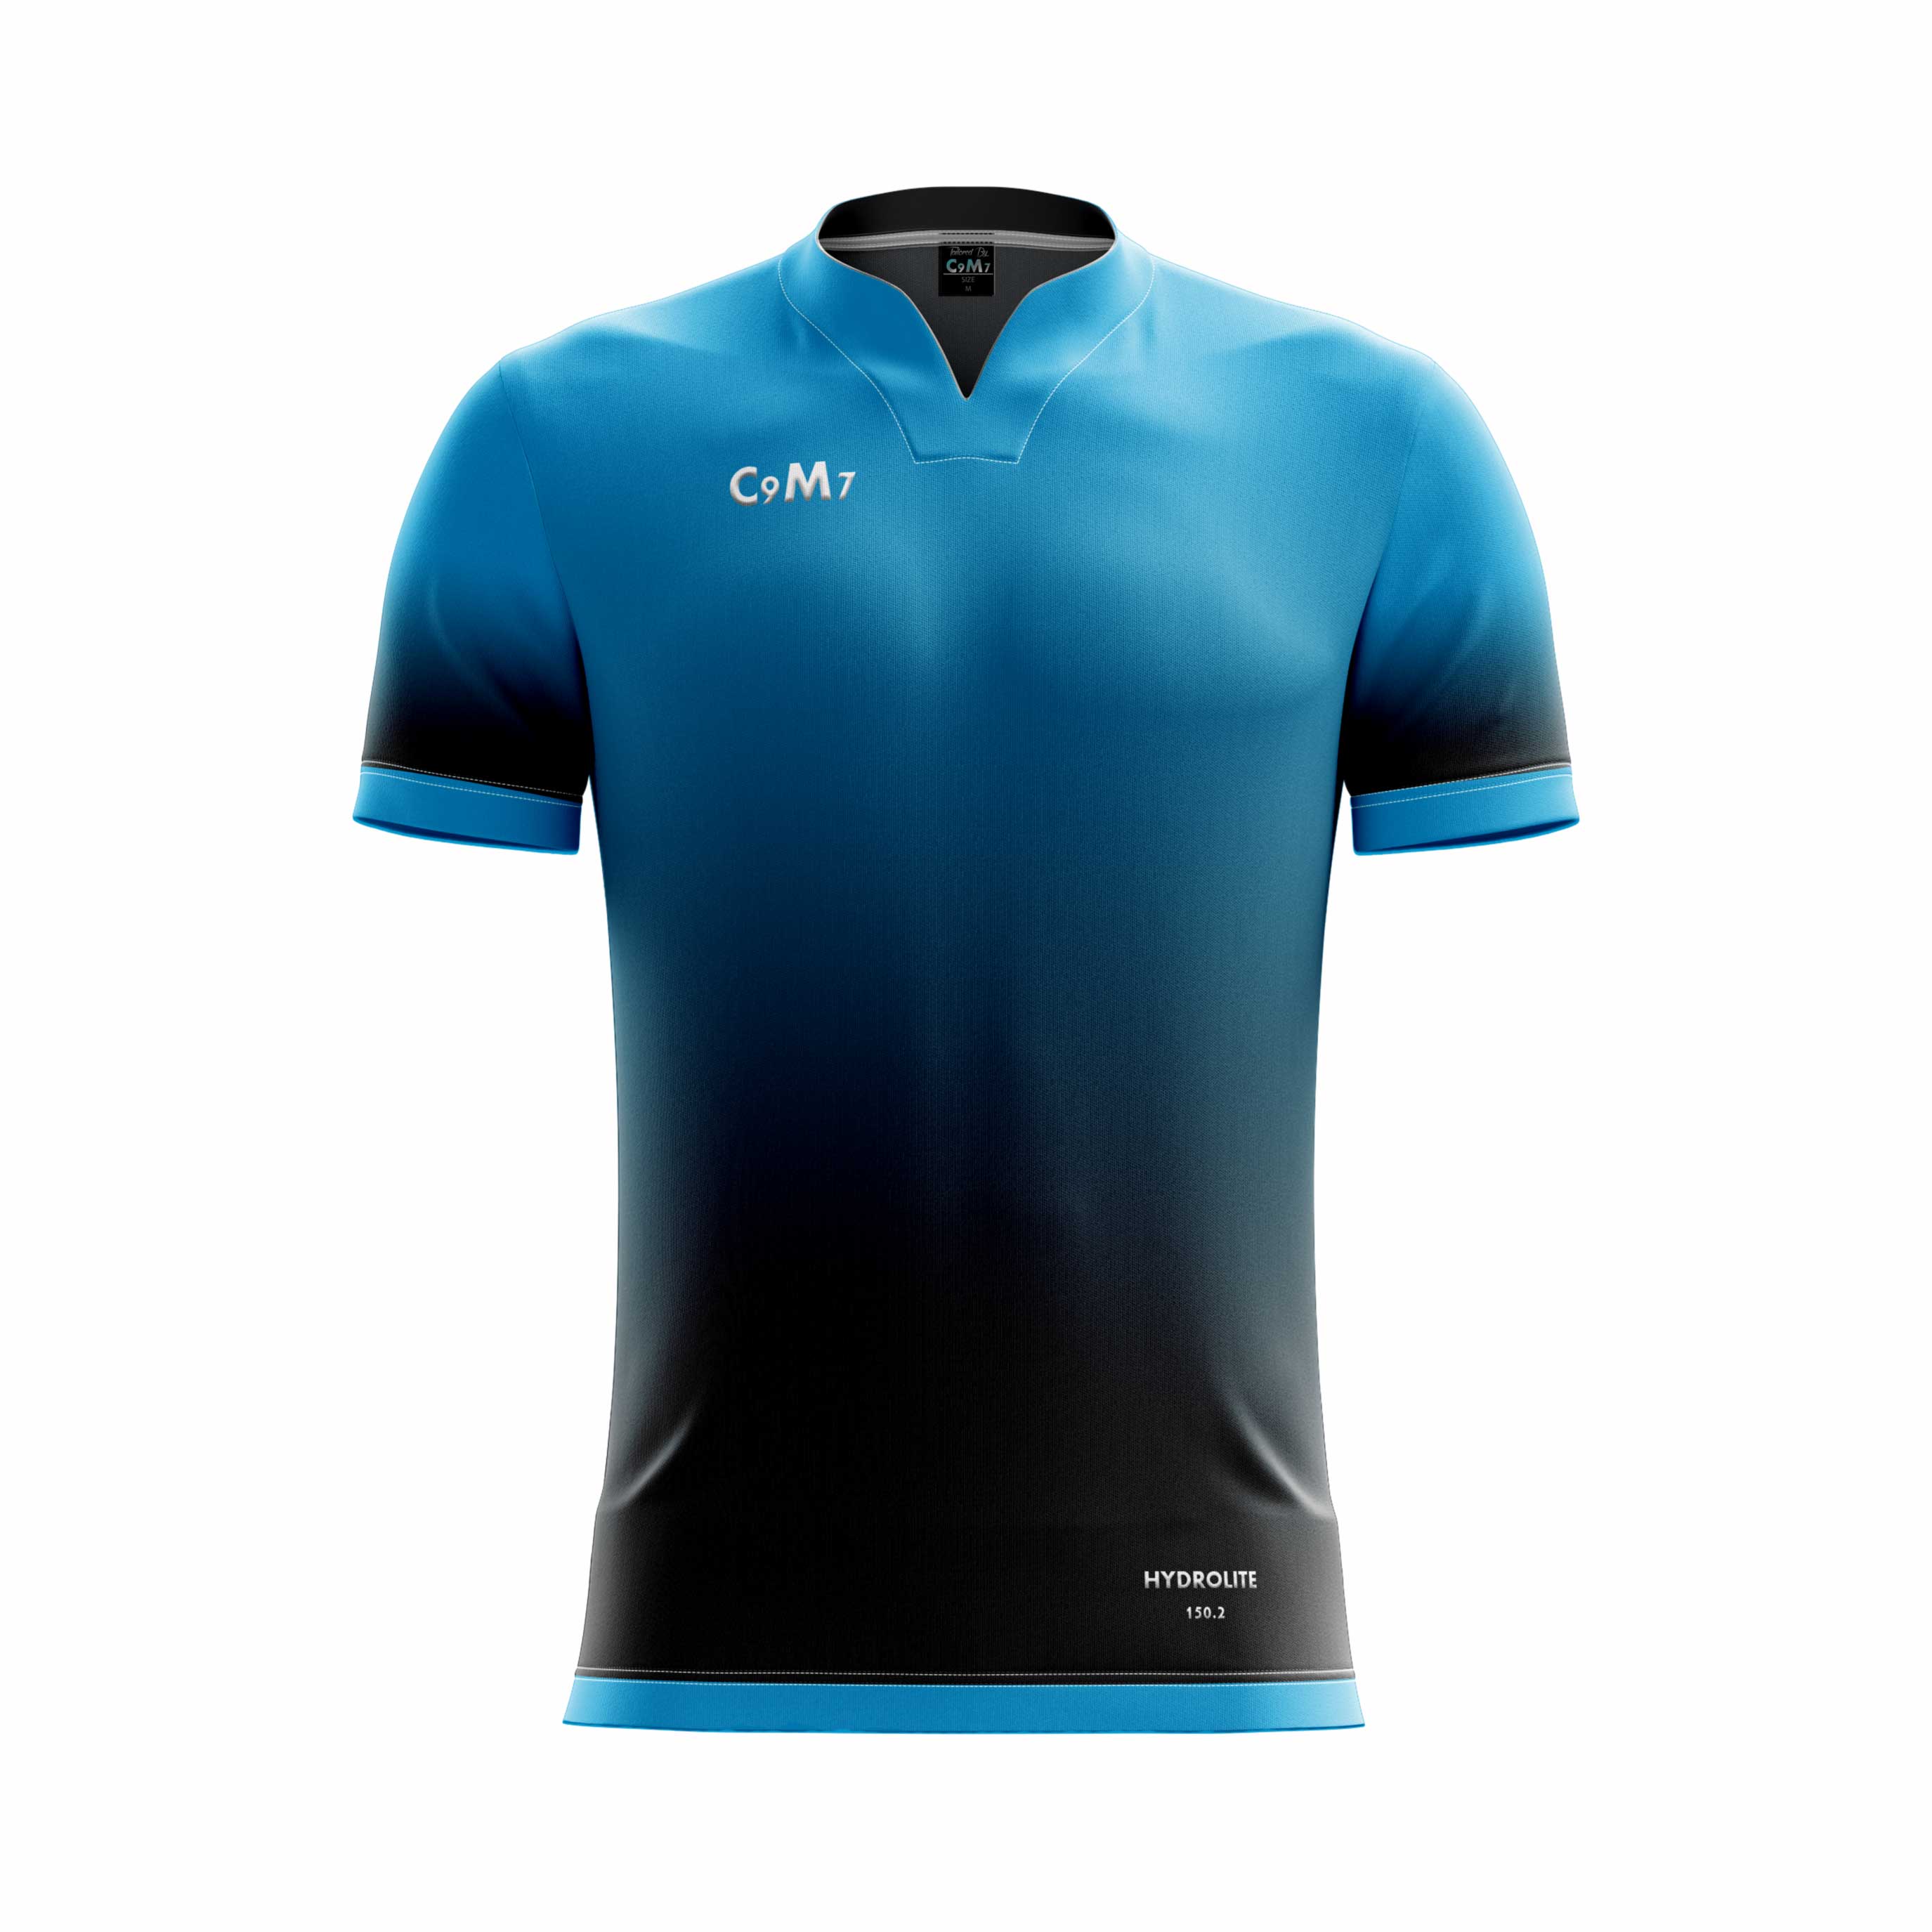 blue and green jersey